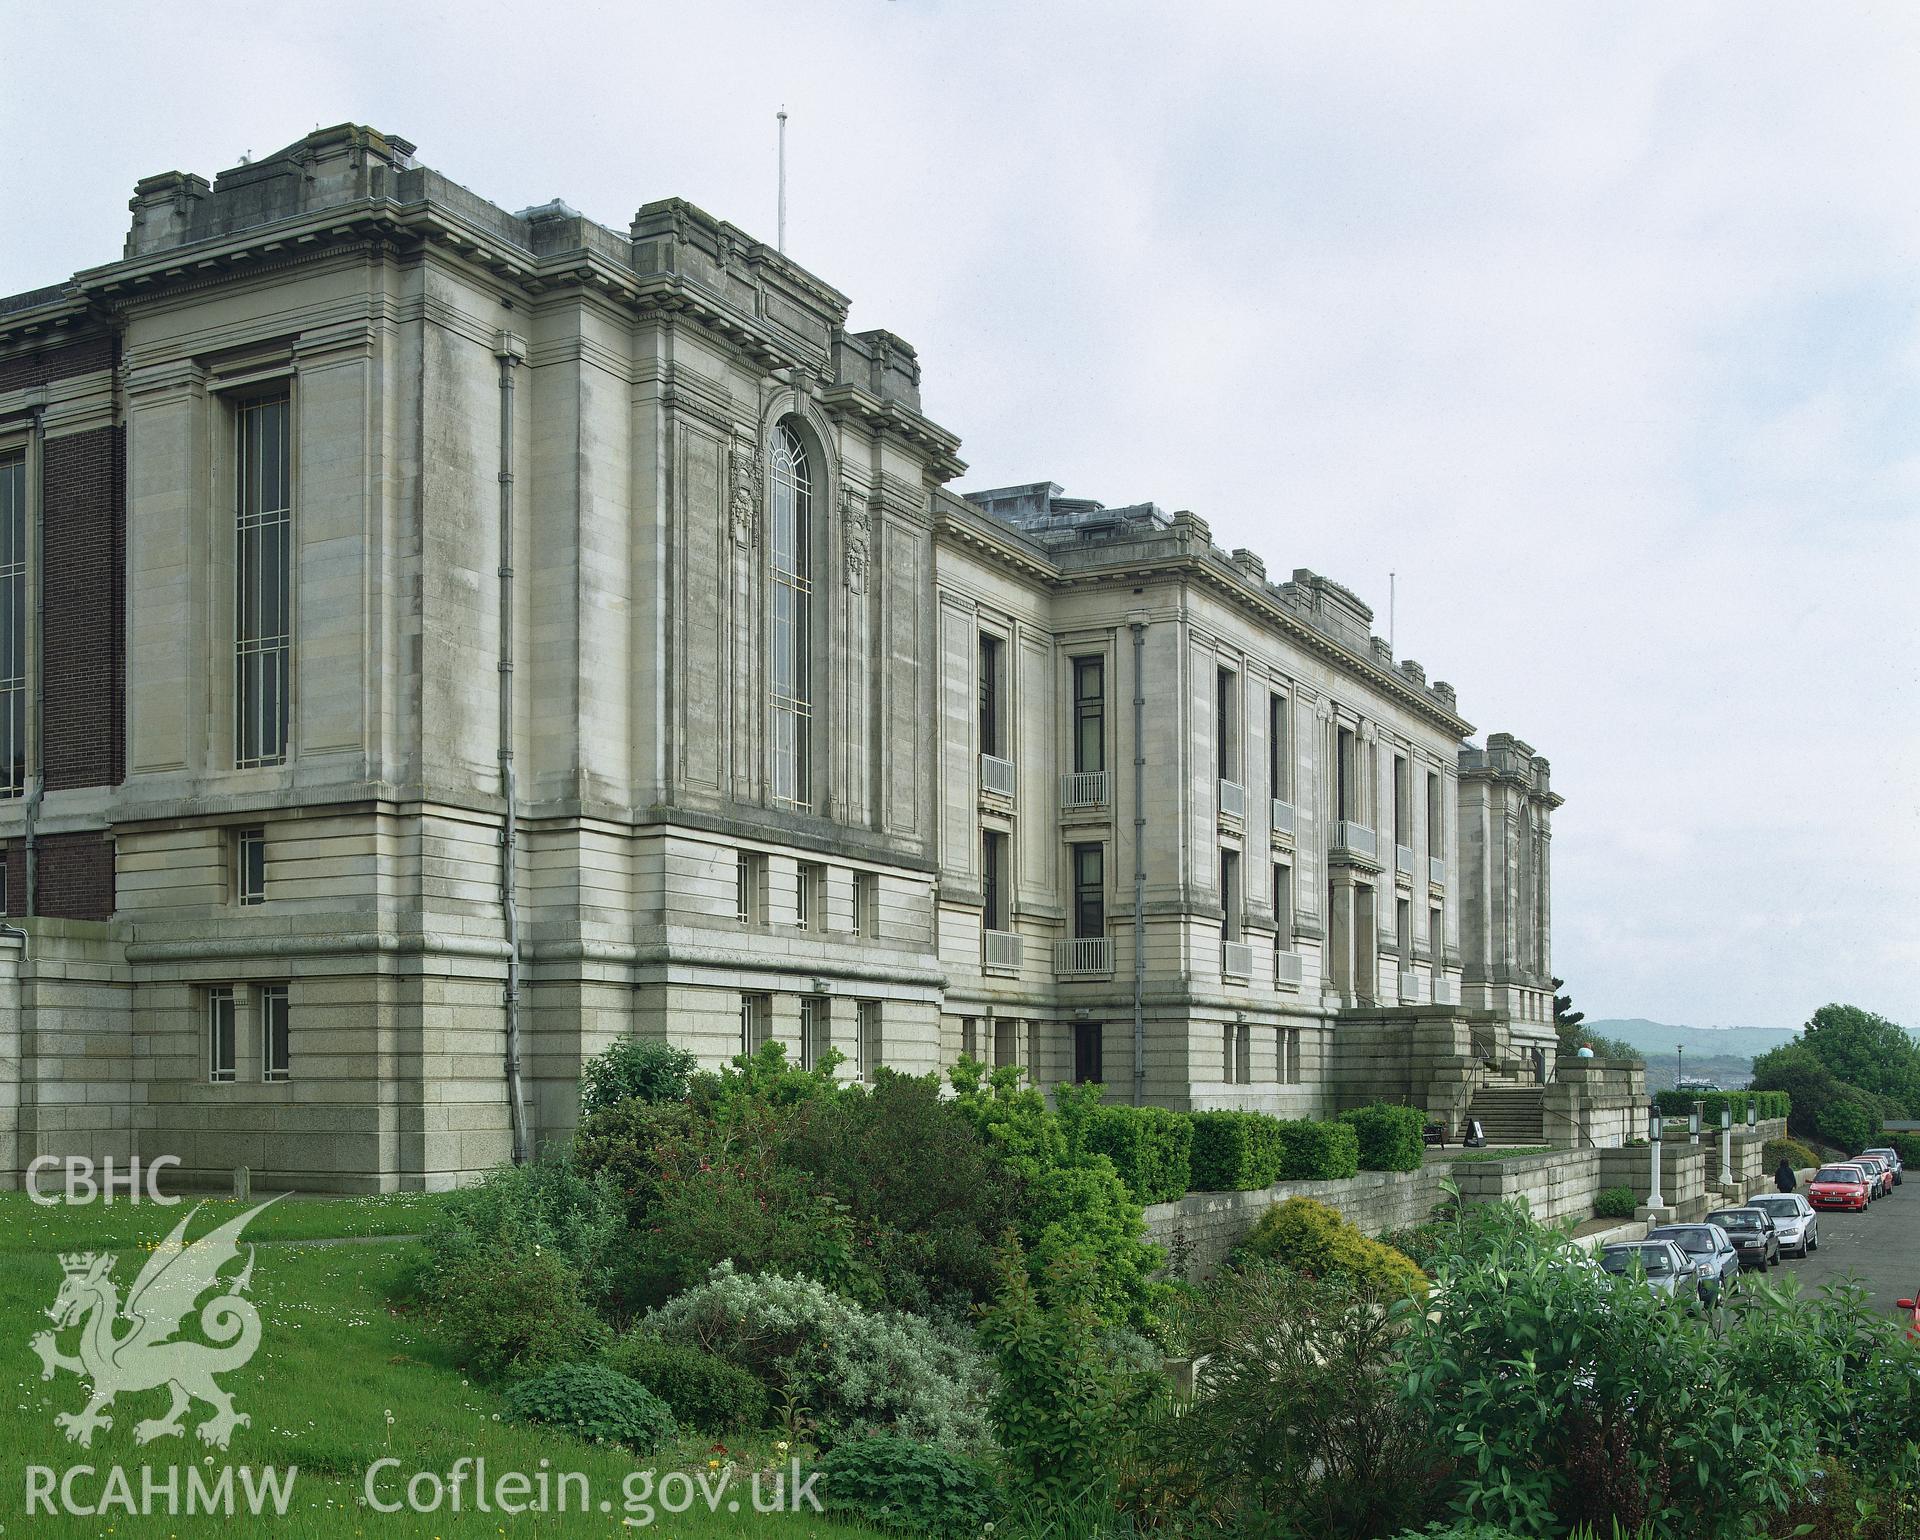 RCAHMW colour transparency showing exterior view of National Library of Wales, Aberystwyth